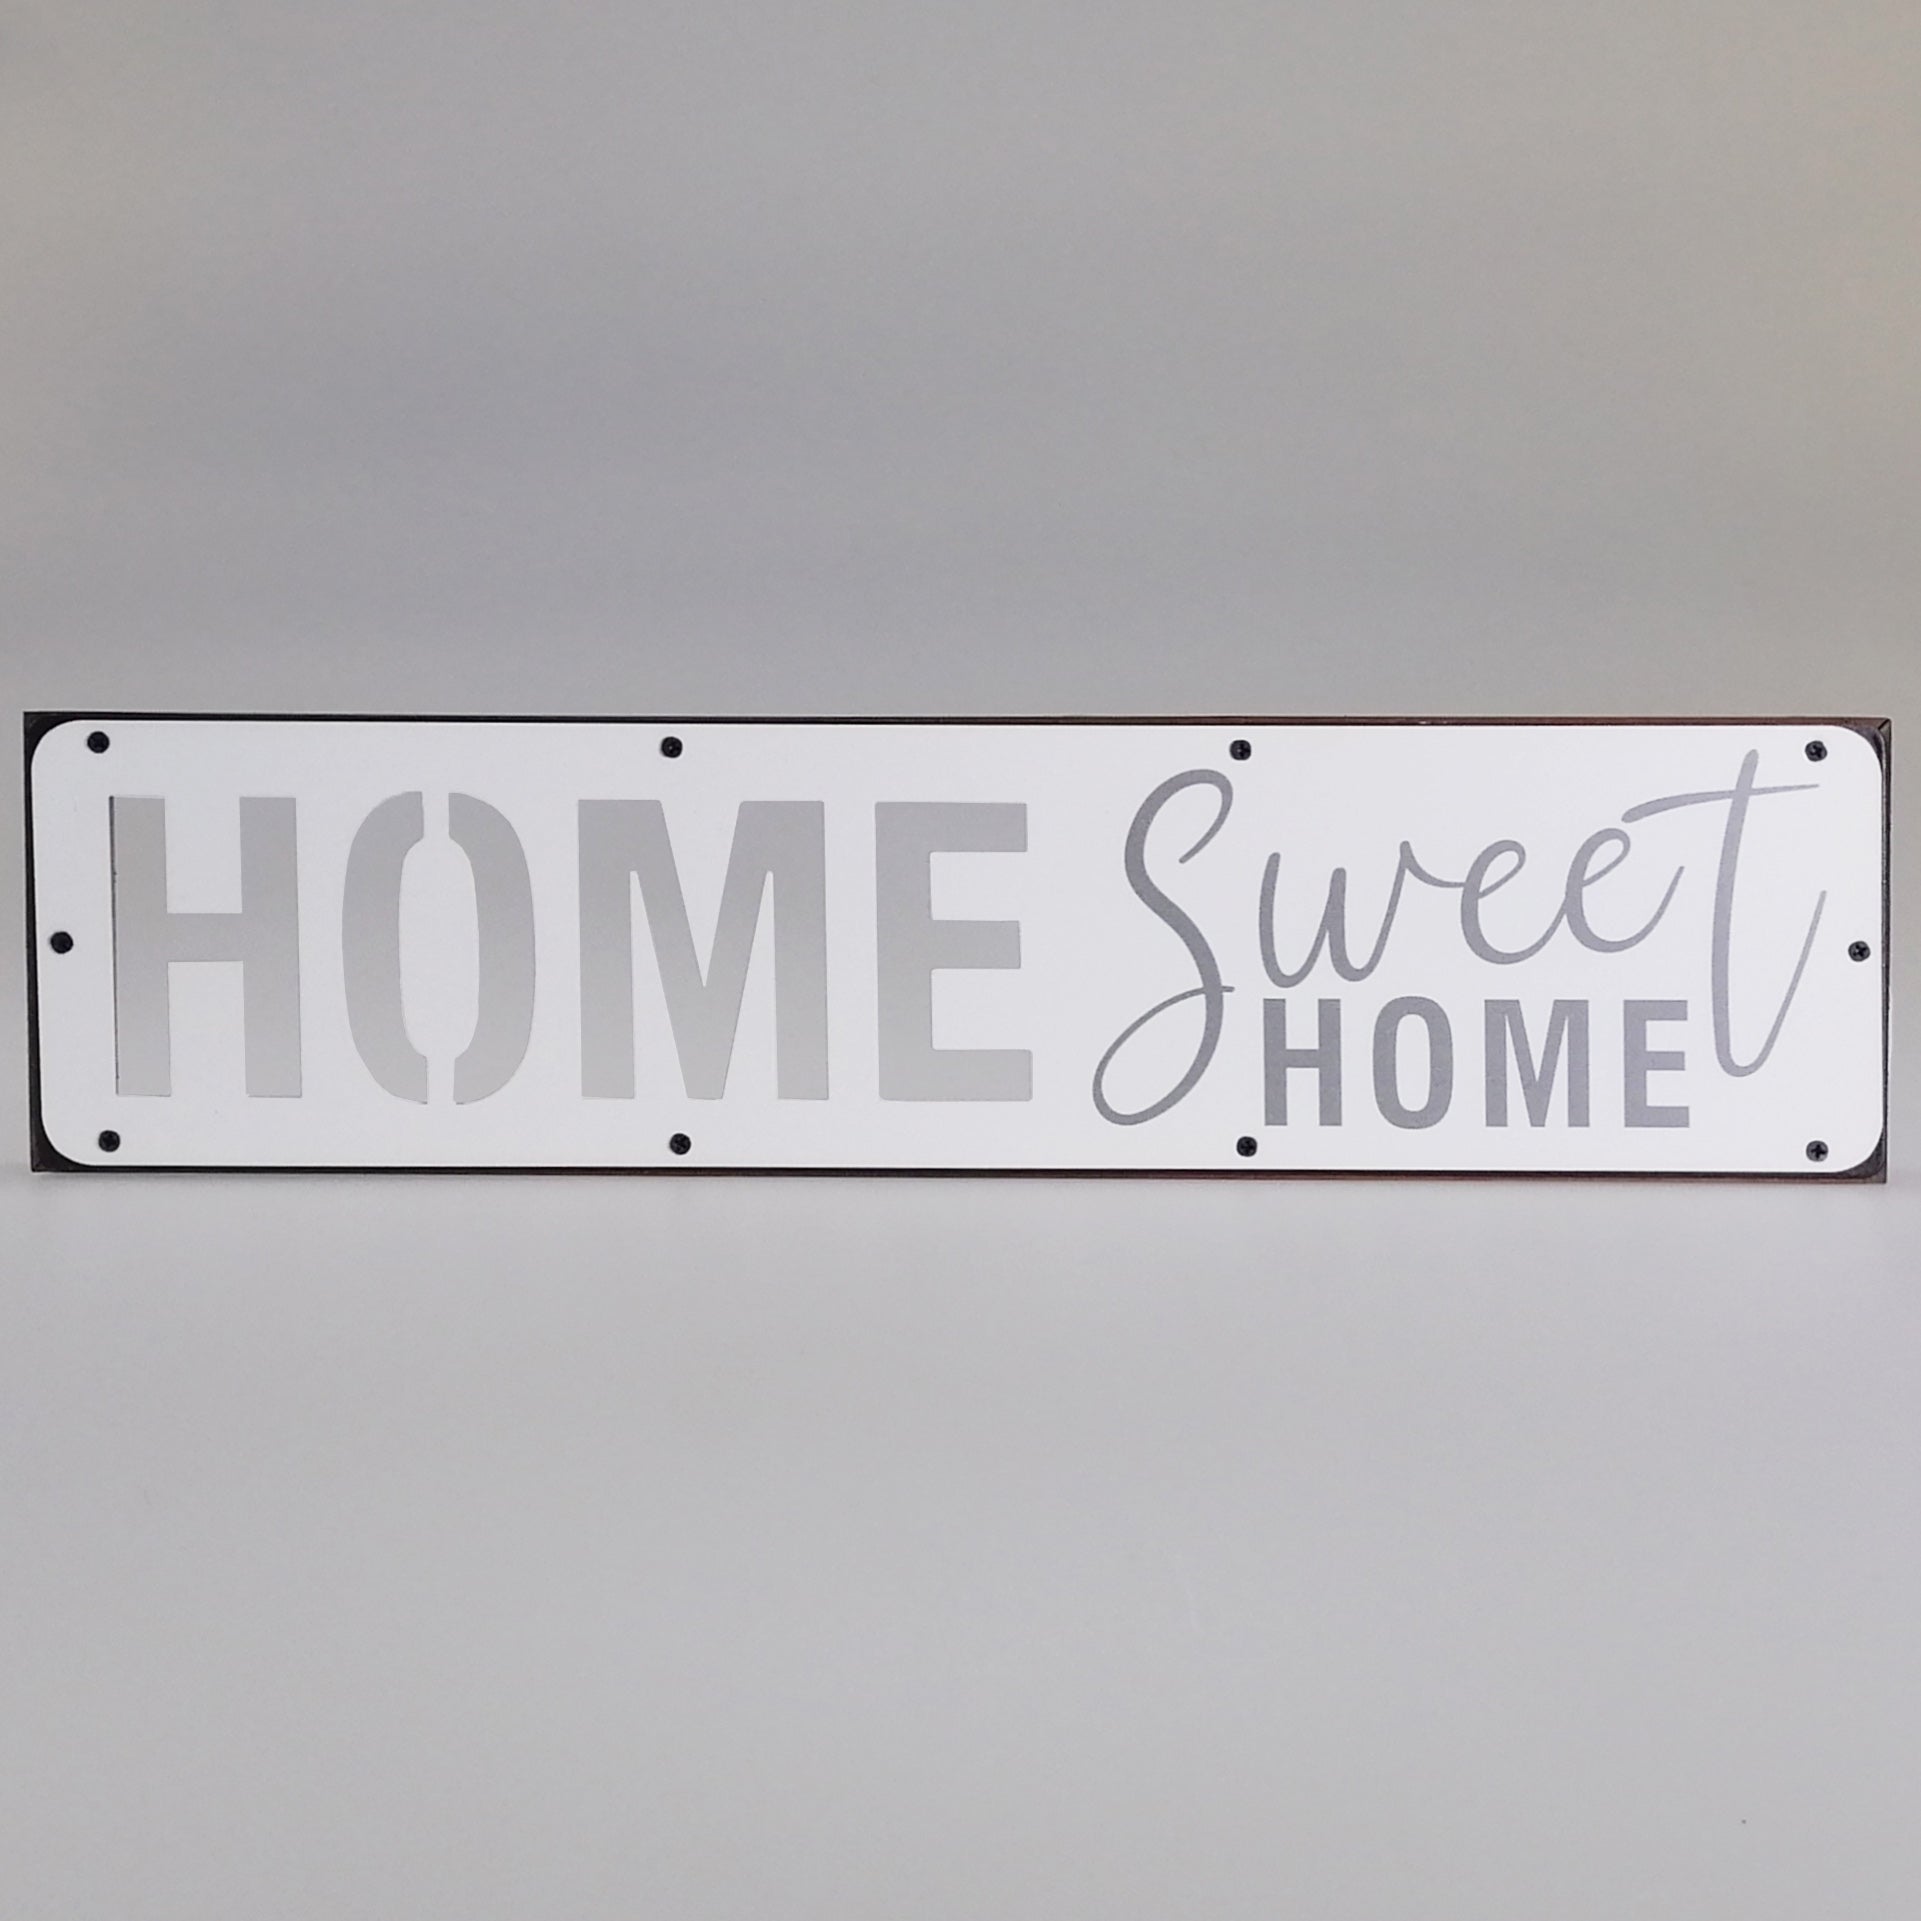 Home Sweet Home' Metal & Wood Plaque Sign